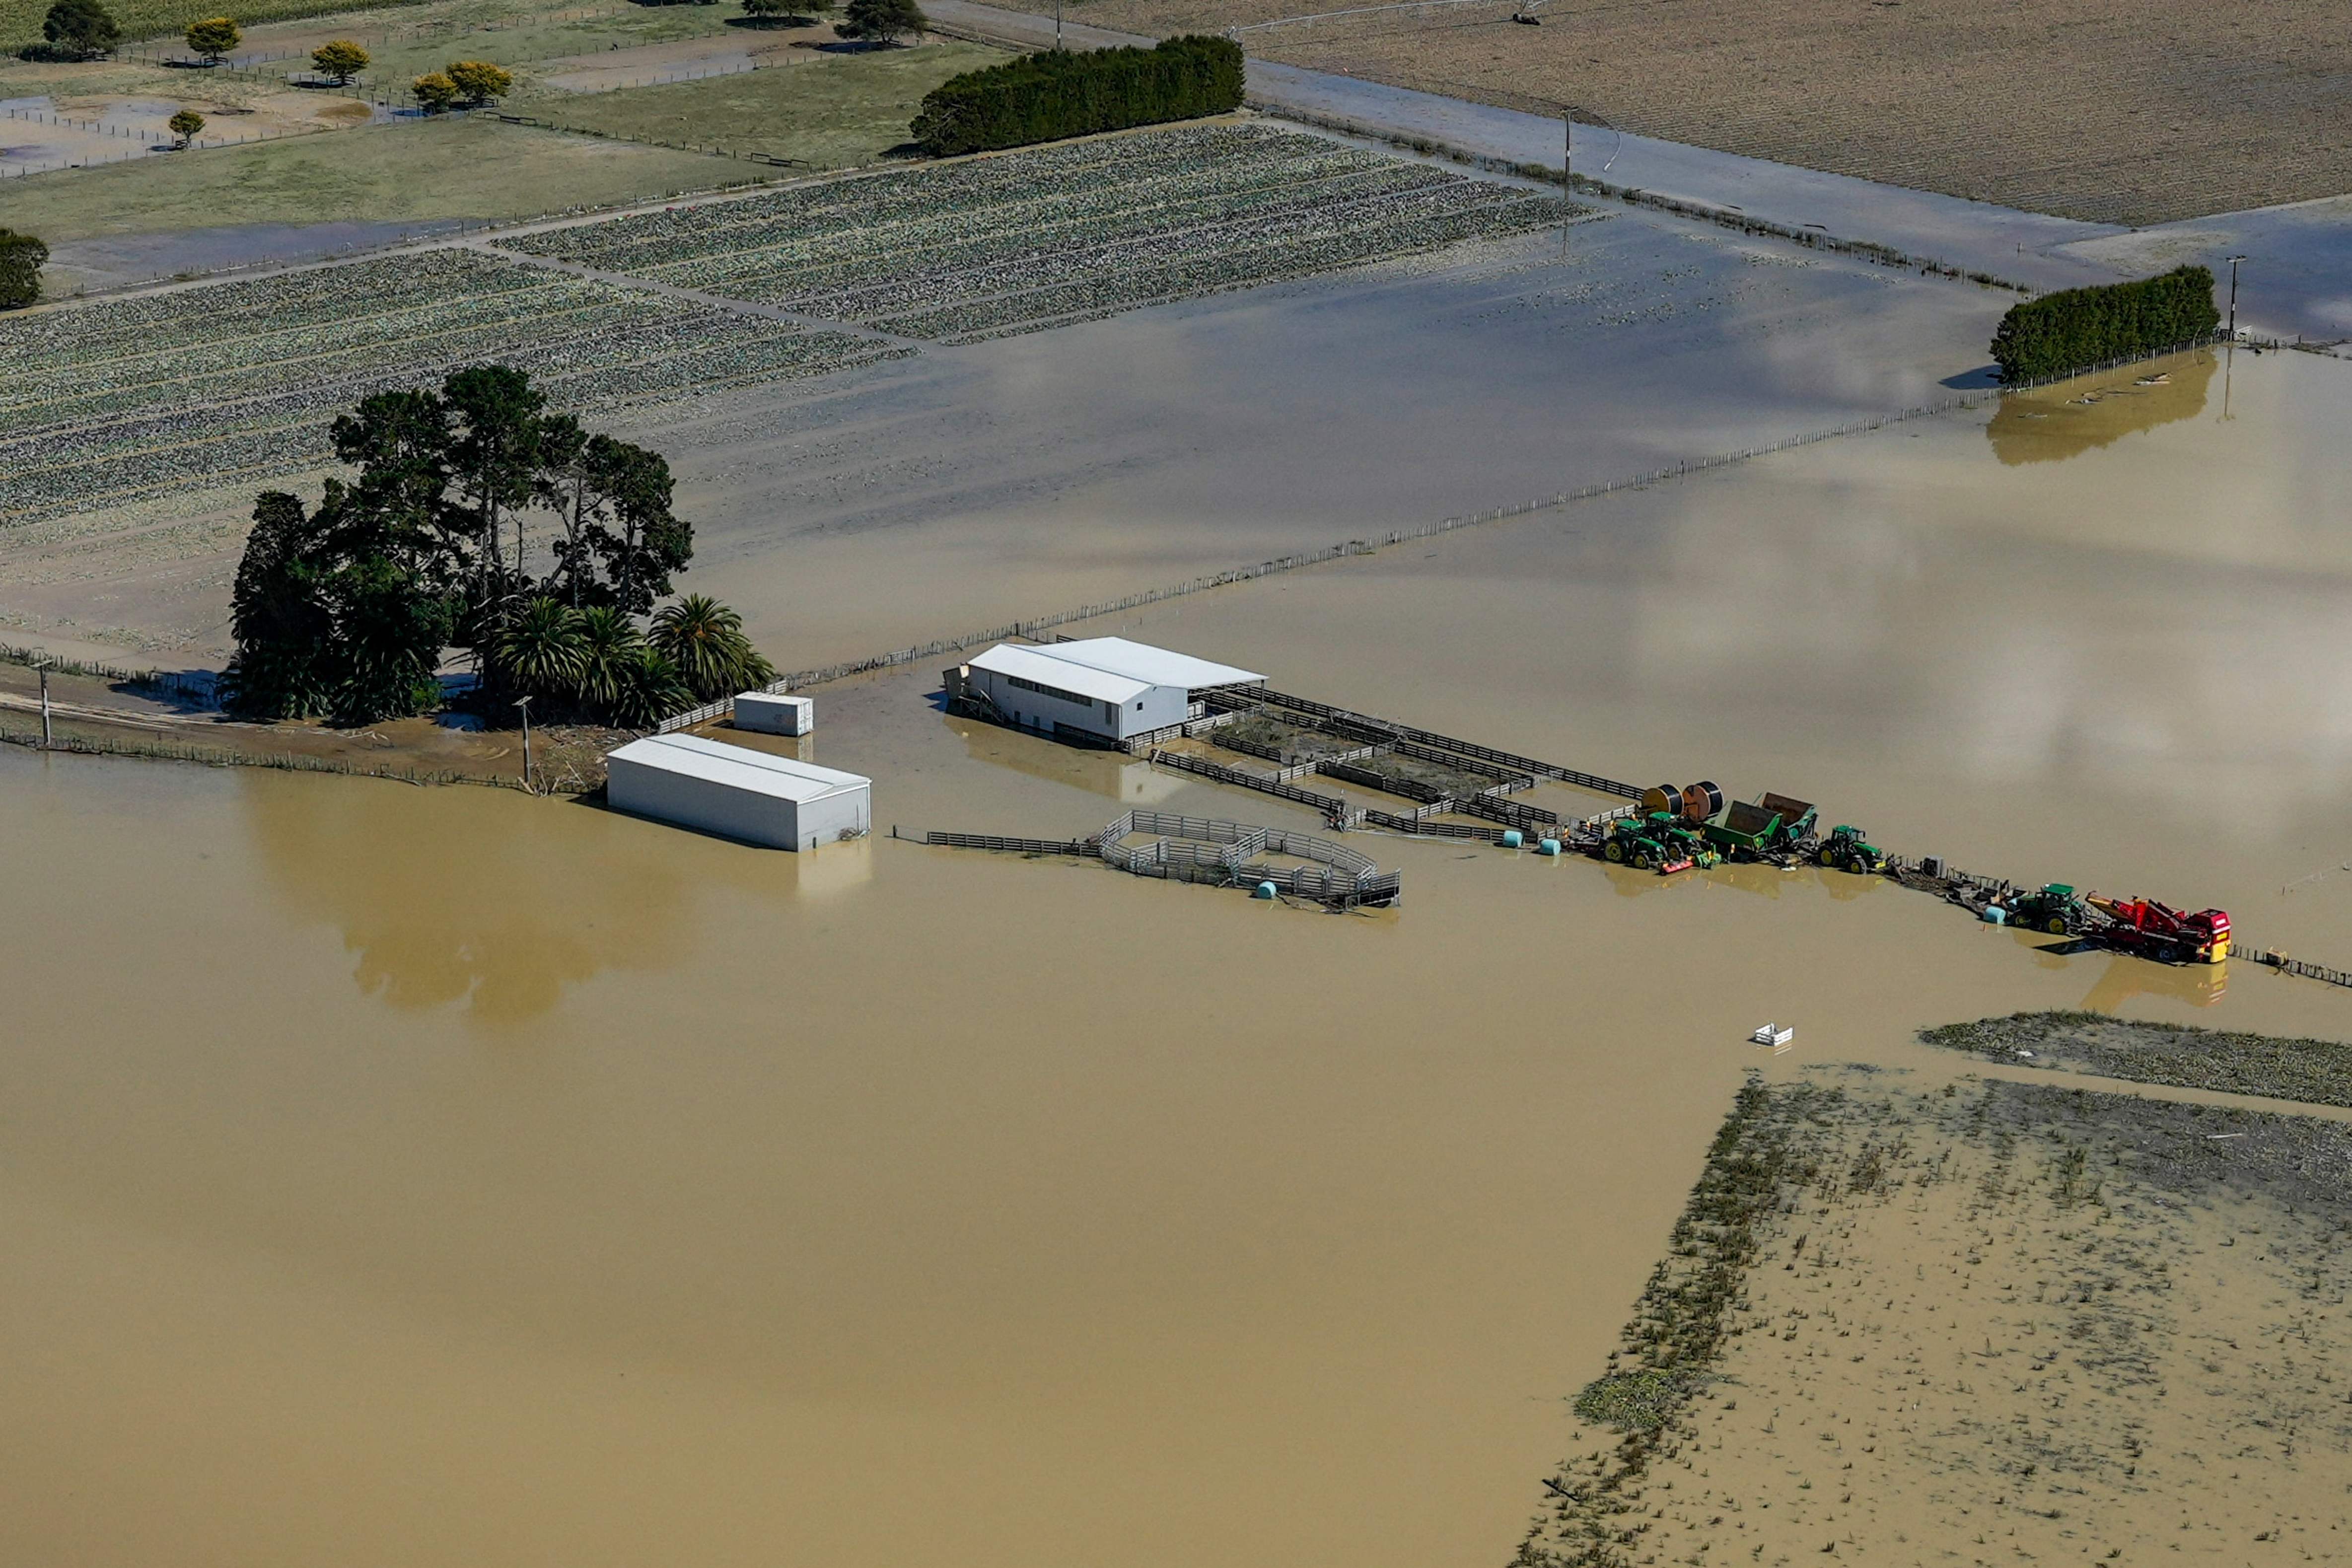 An aerial view shows the damage left by Cyclone Gabrielle in the Esk Valley near Napier on 18 February